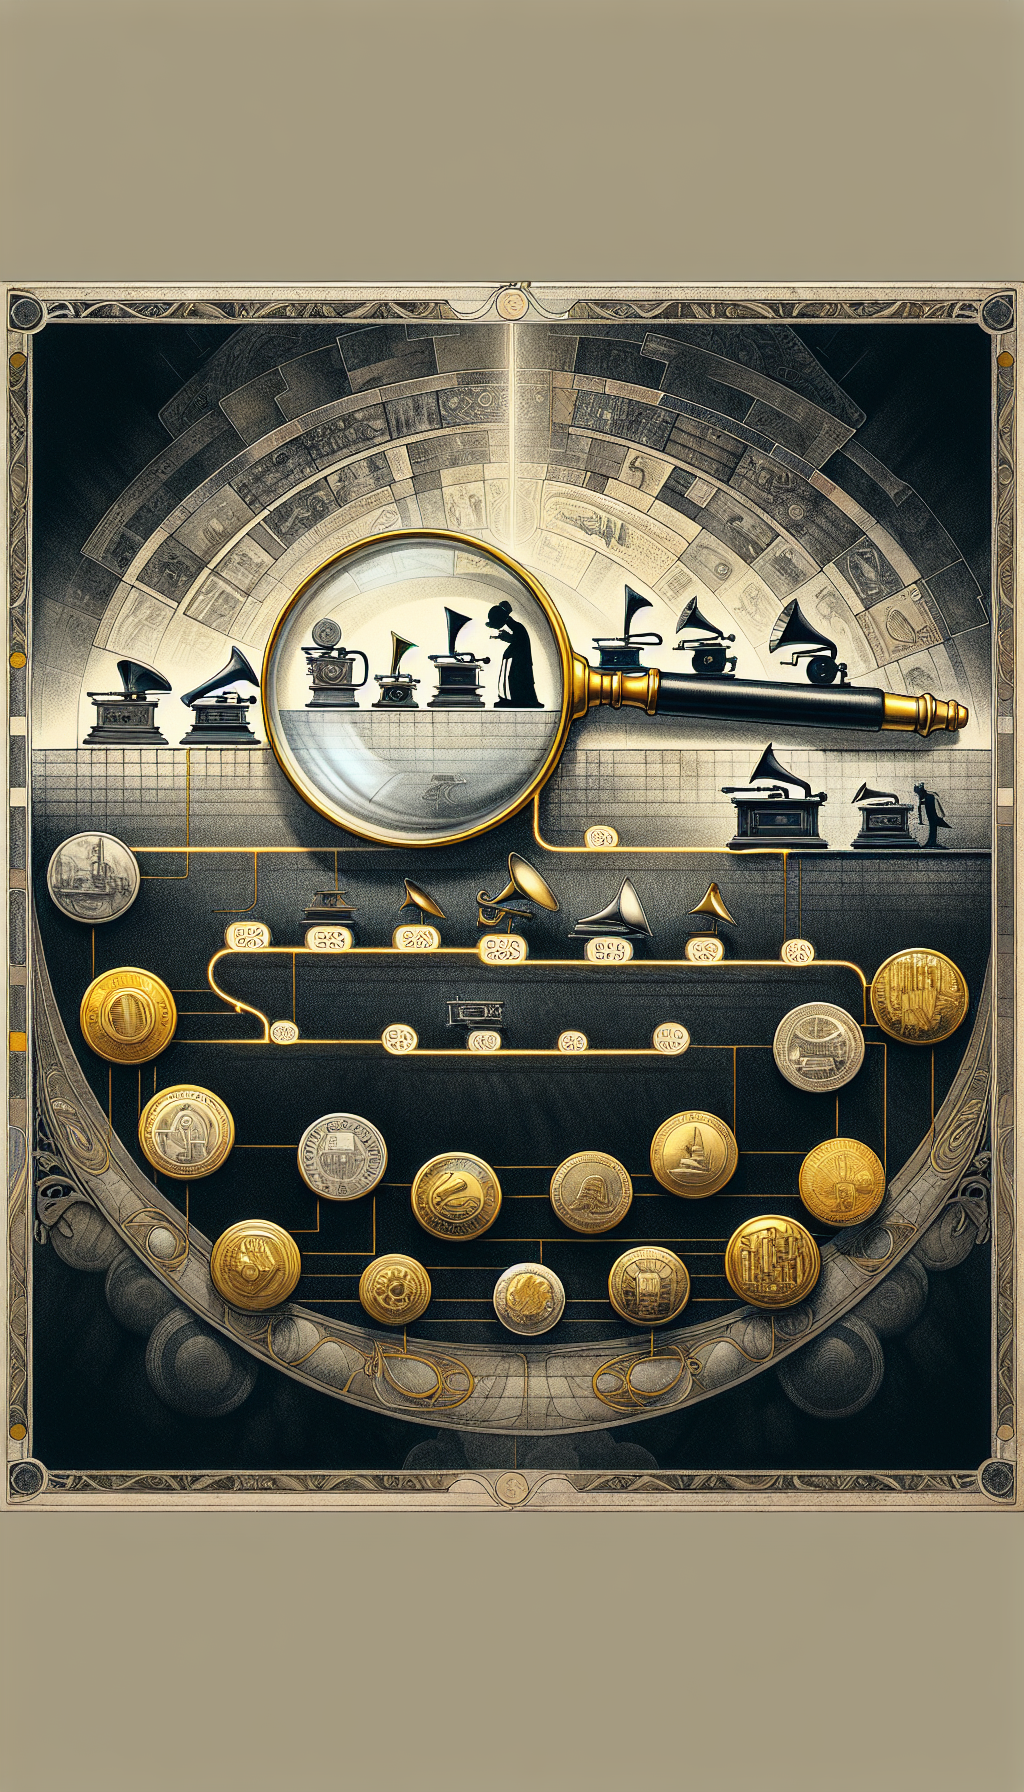 The illustration displays a magnifying glass hovering over a timeline etched with iconic Victrola silhouettes, with each era's model marked by its release year. Beneath the timeline, reflective gold coins symbolize the antique player's value, growing larger towards the present. The image is a pastiche of styles, with Art Deco borders, photorealistic Victrolas, and an Impressionist backdrop, suggesting the blend of history and worth.